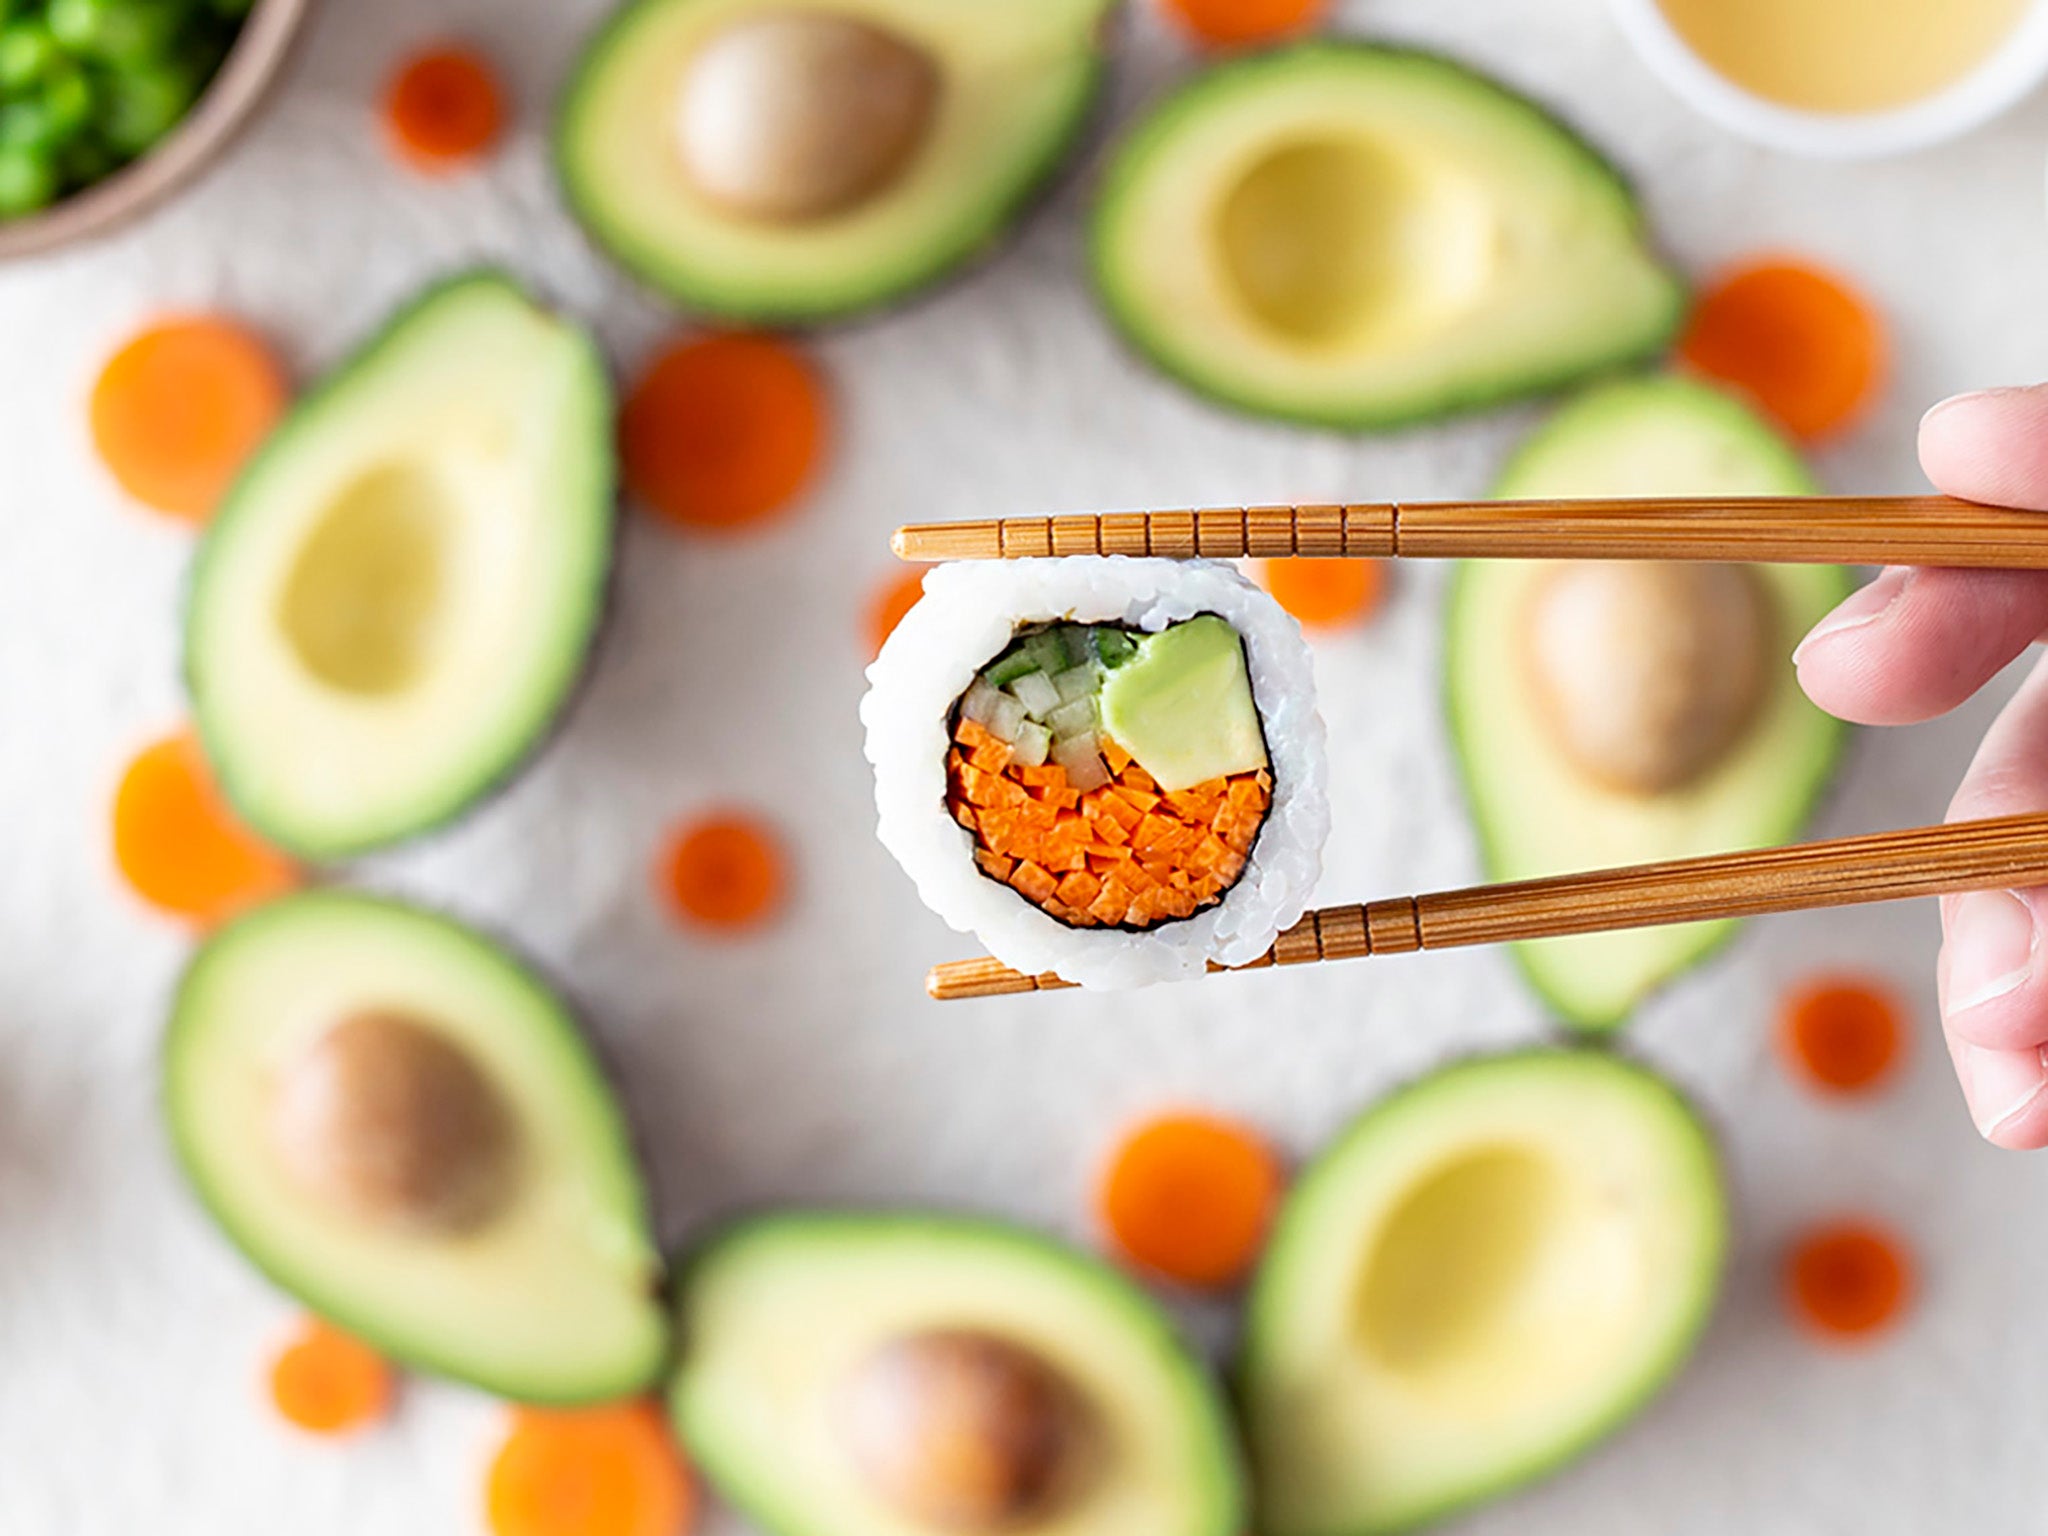 Scroll down for simple steps to recreate your favourite sushi rolls at home